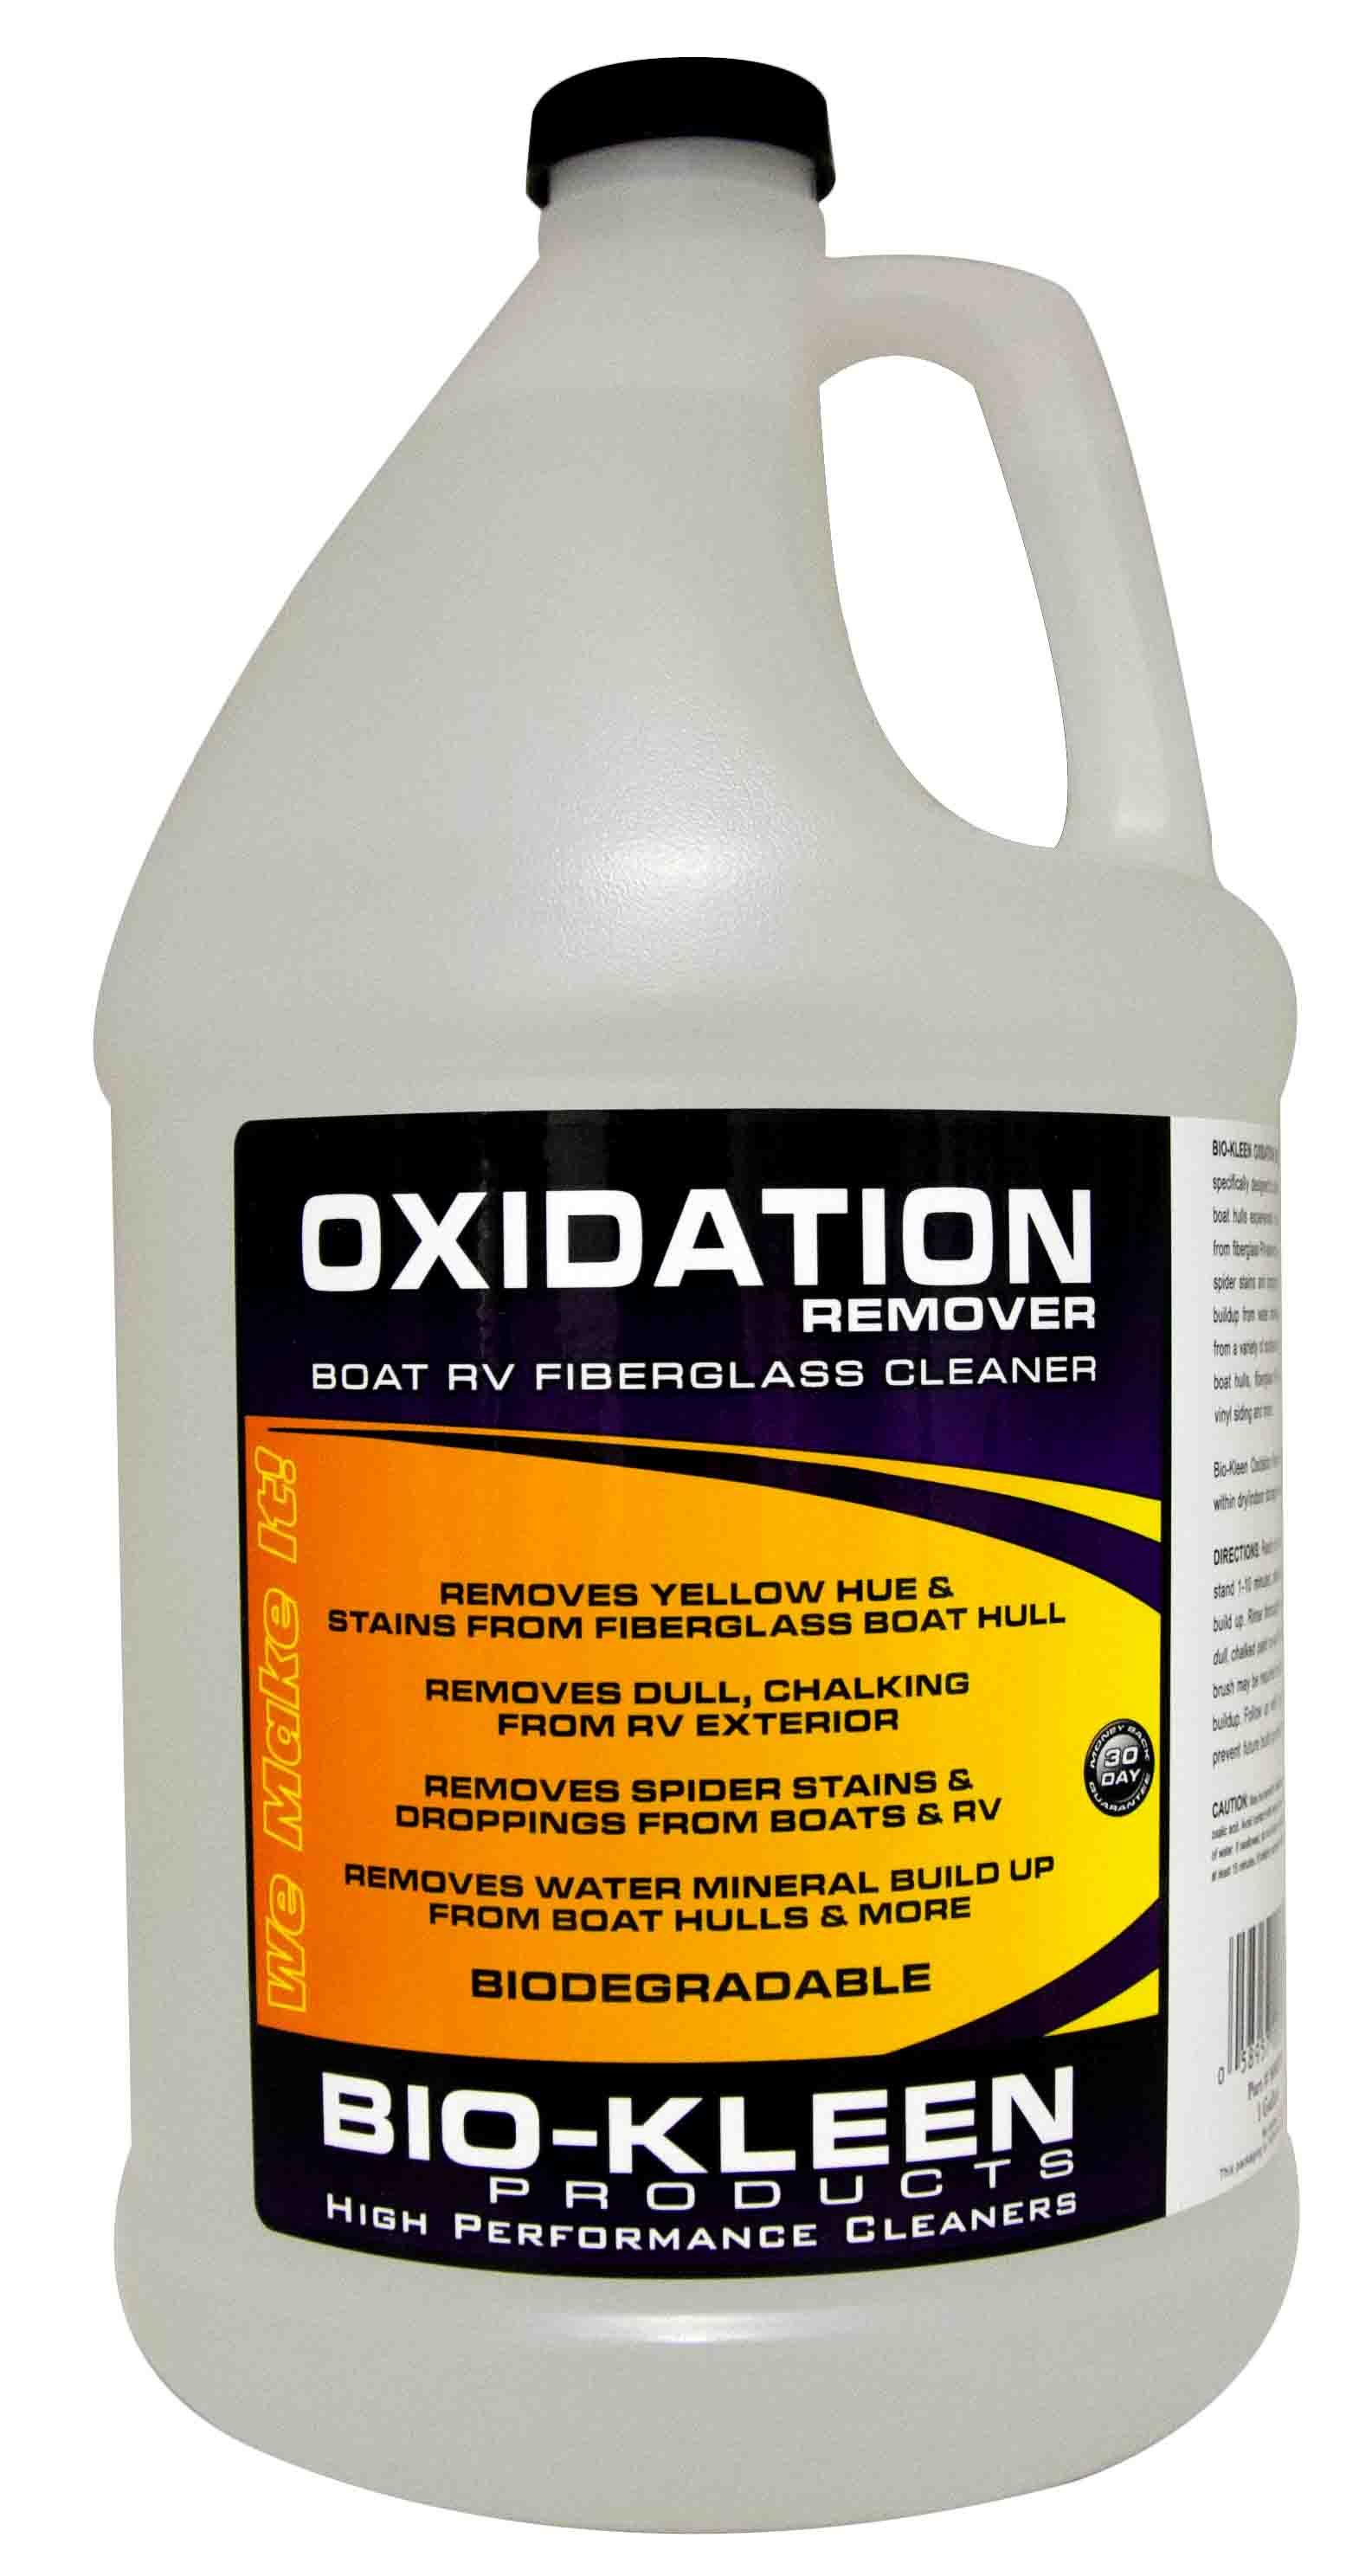 Contact Cleaner, Oxidation & Dirt Removal